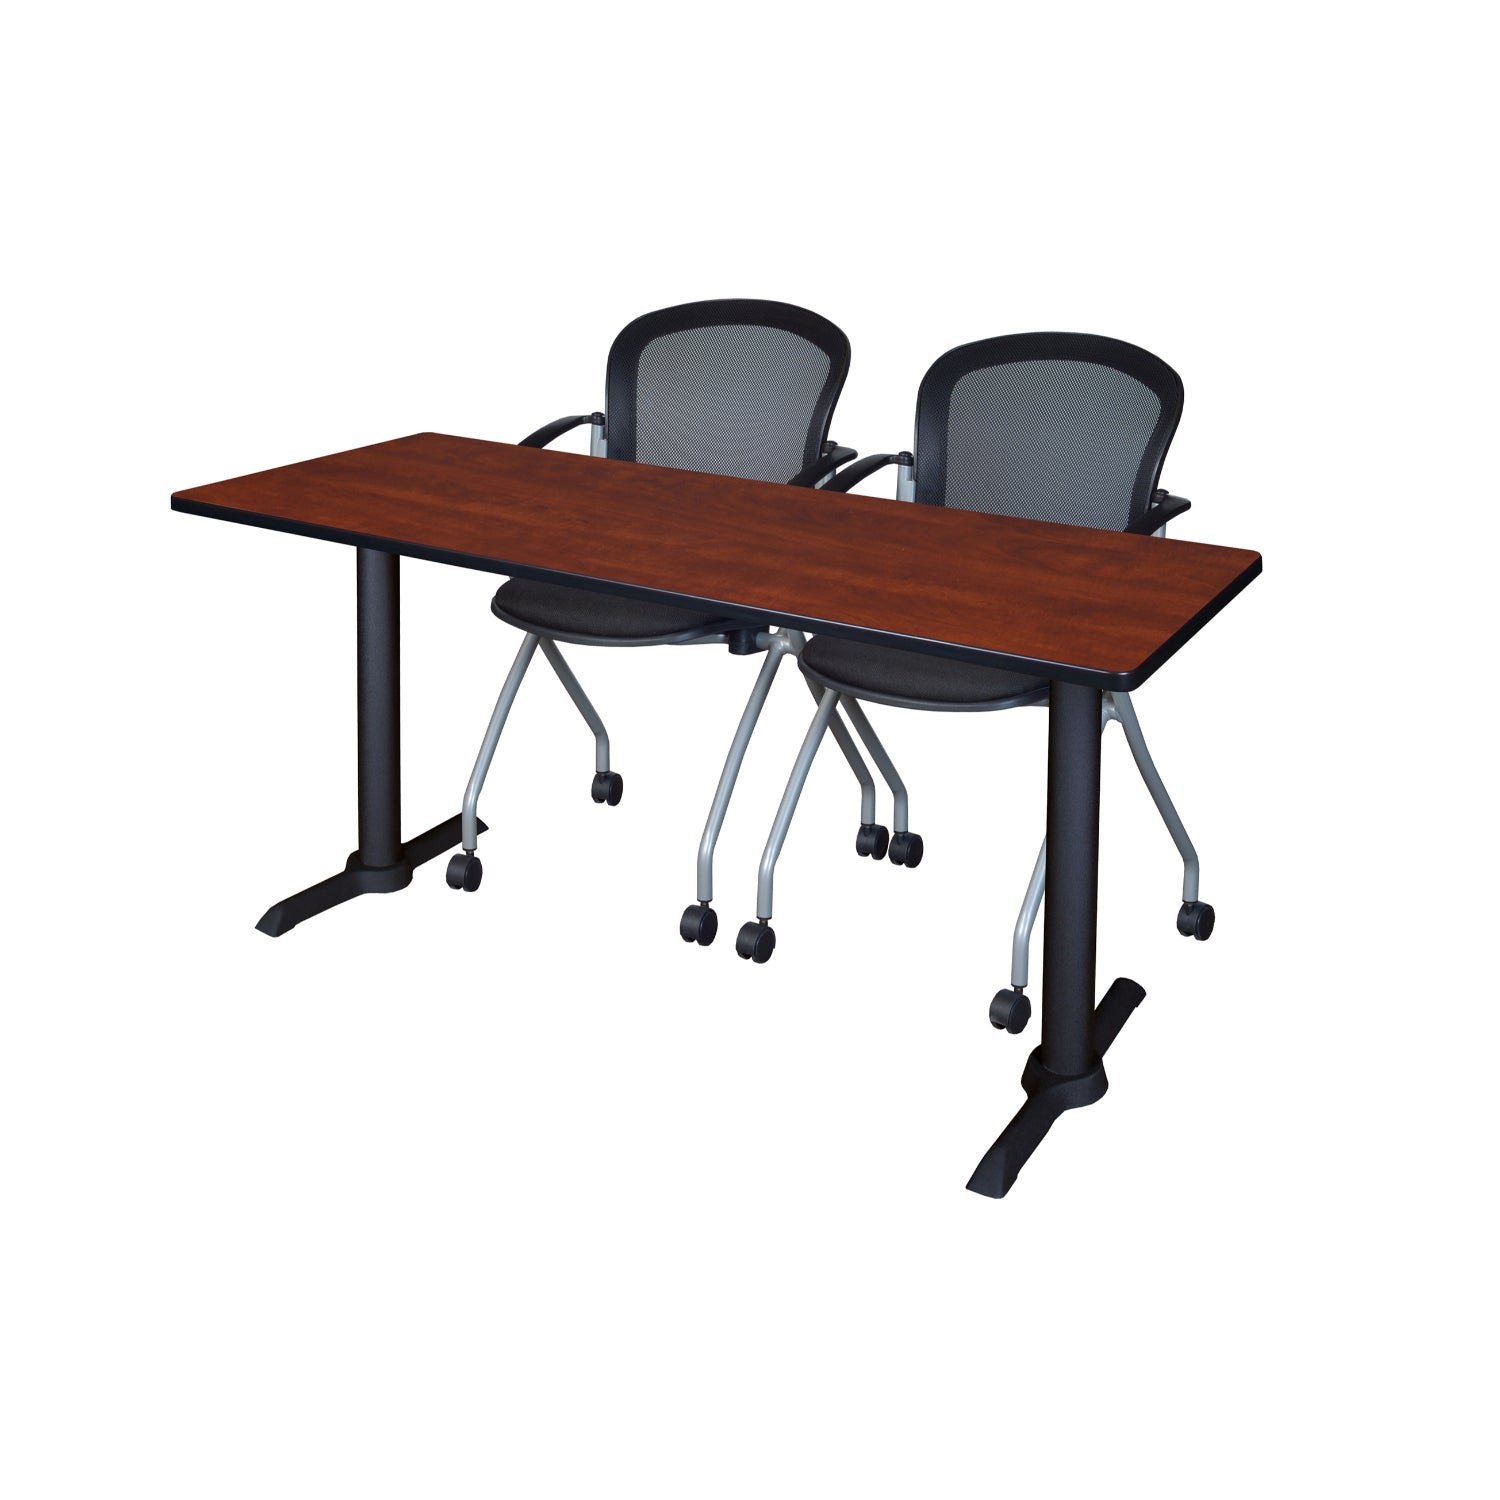 Cain Training Table and Chair Package, Cain 66" x 24" T-Base Training/Seminar Table with 2 Cadence Nesting Chairs